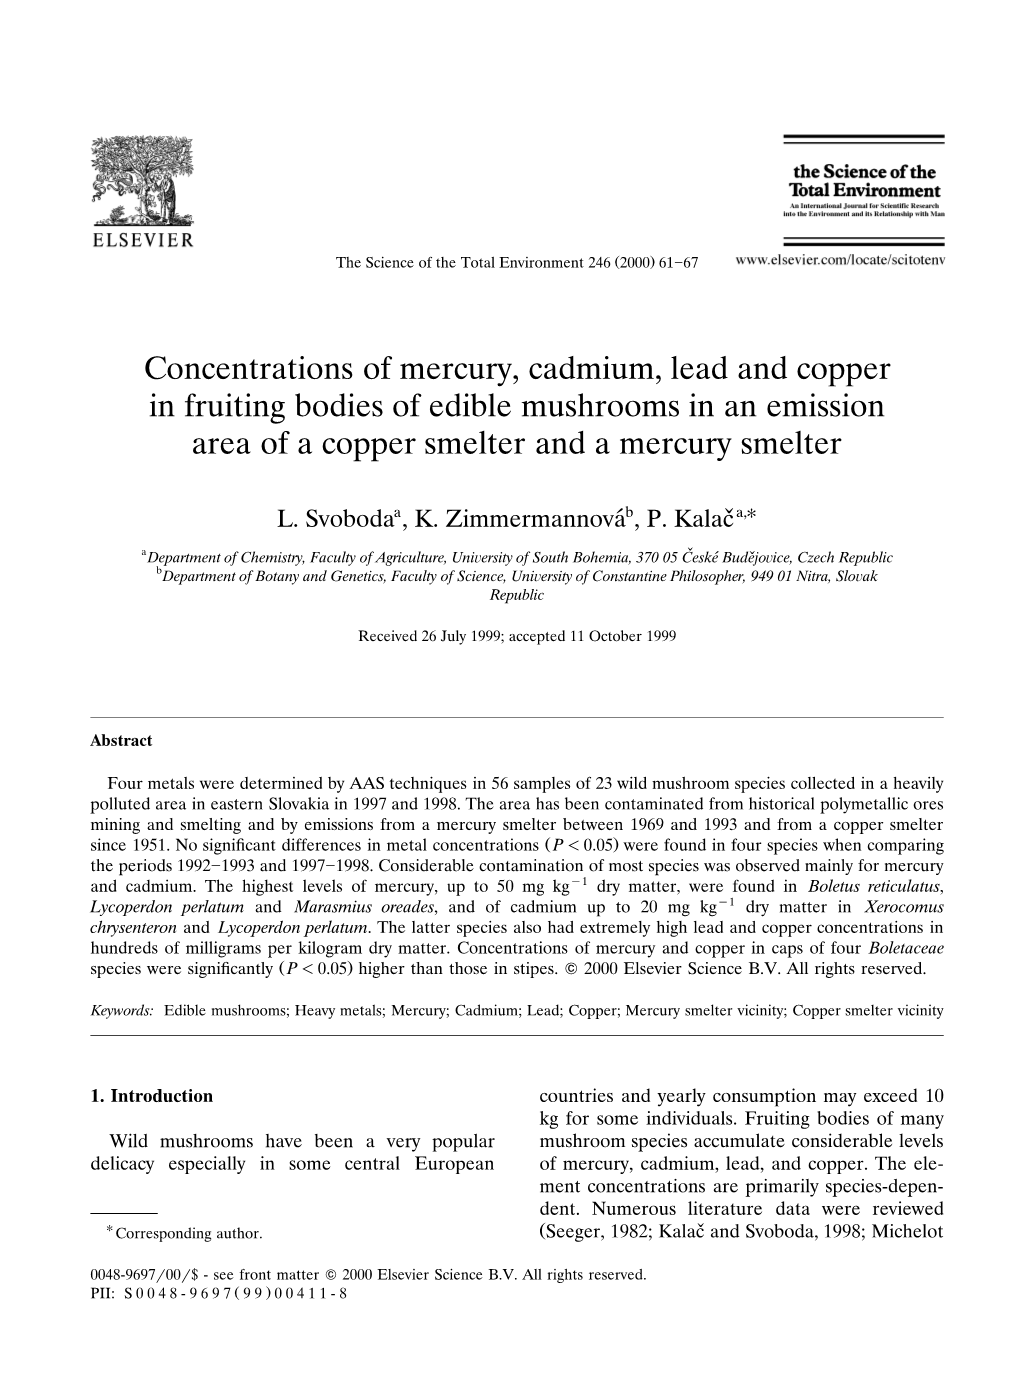 Concentrations of Mercury, Cadmium, Lead and Copper in Fruiting Bodies of Edible Mushrooms in an Emission Area of a Copper Smelter and a Mercury Smelter